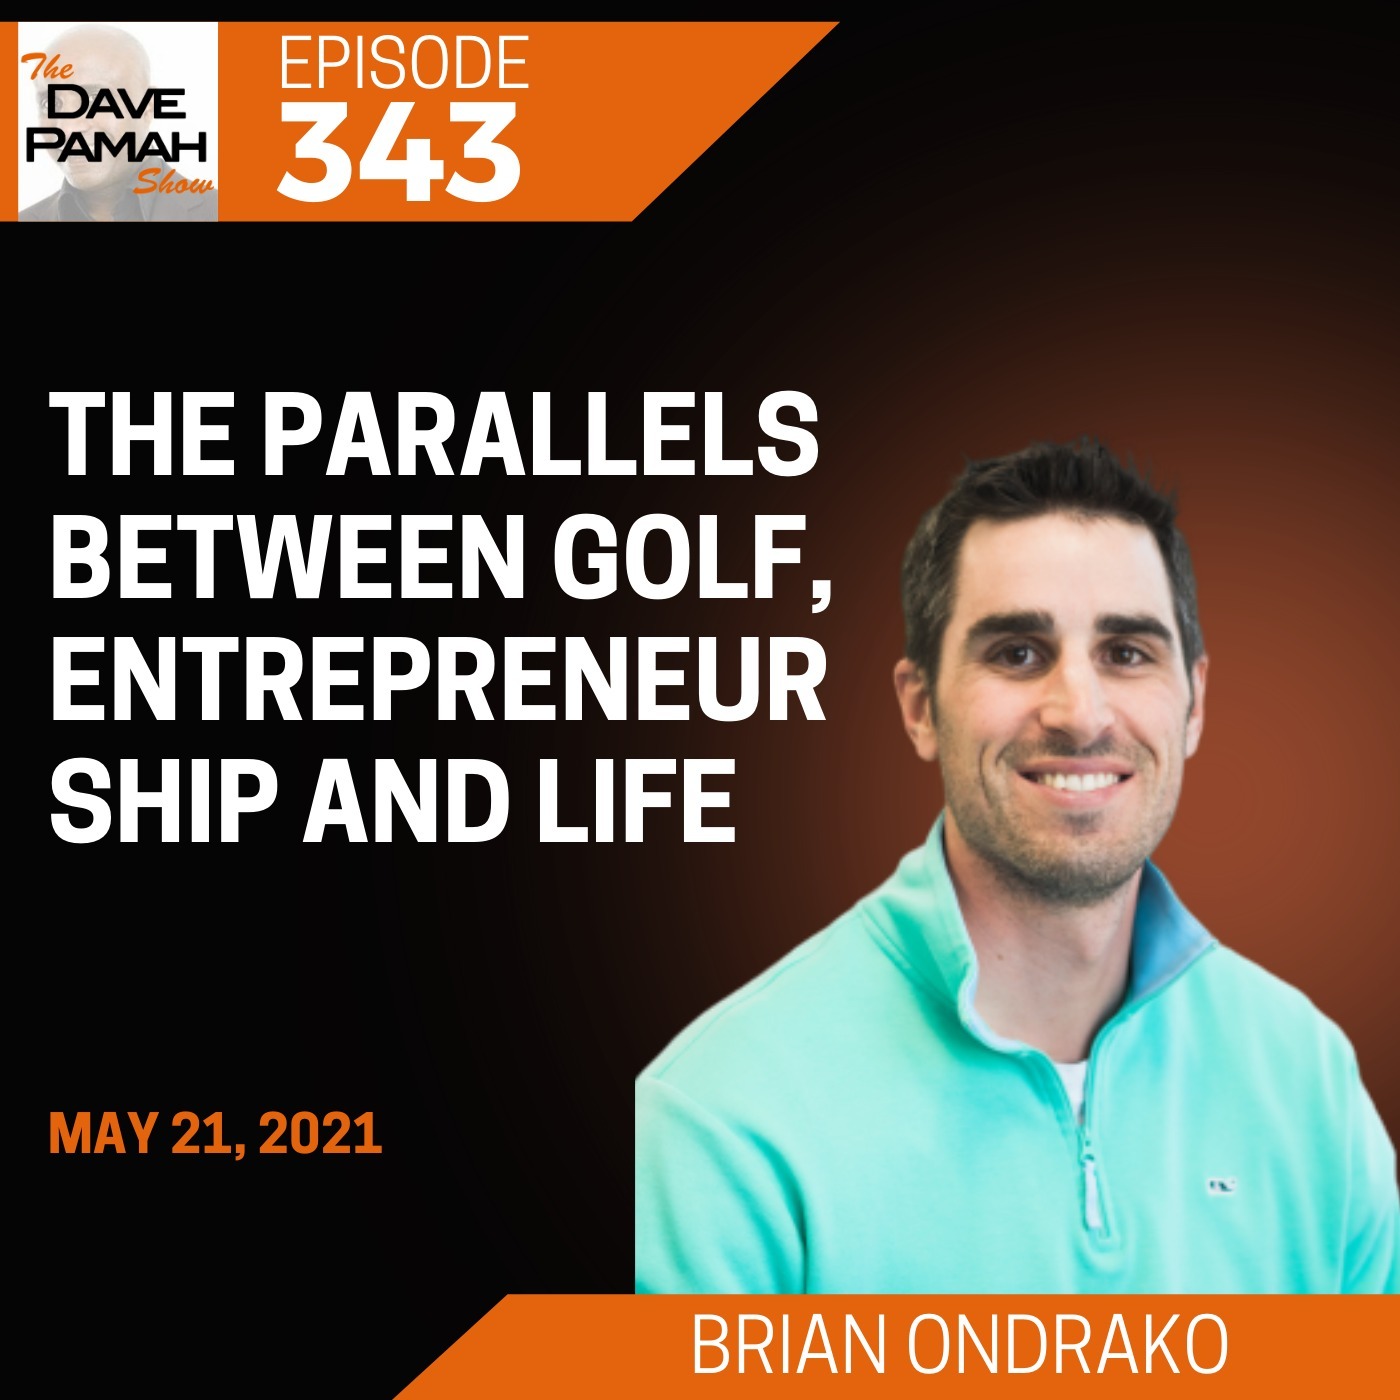 The parallels between golf, entrepreneurship and life with Brian Ondrako